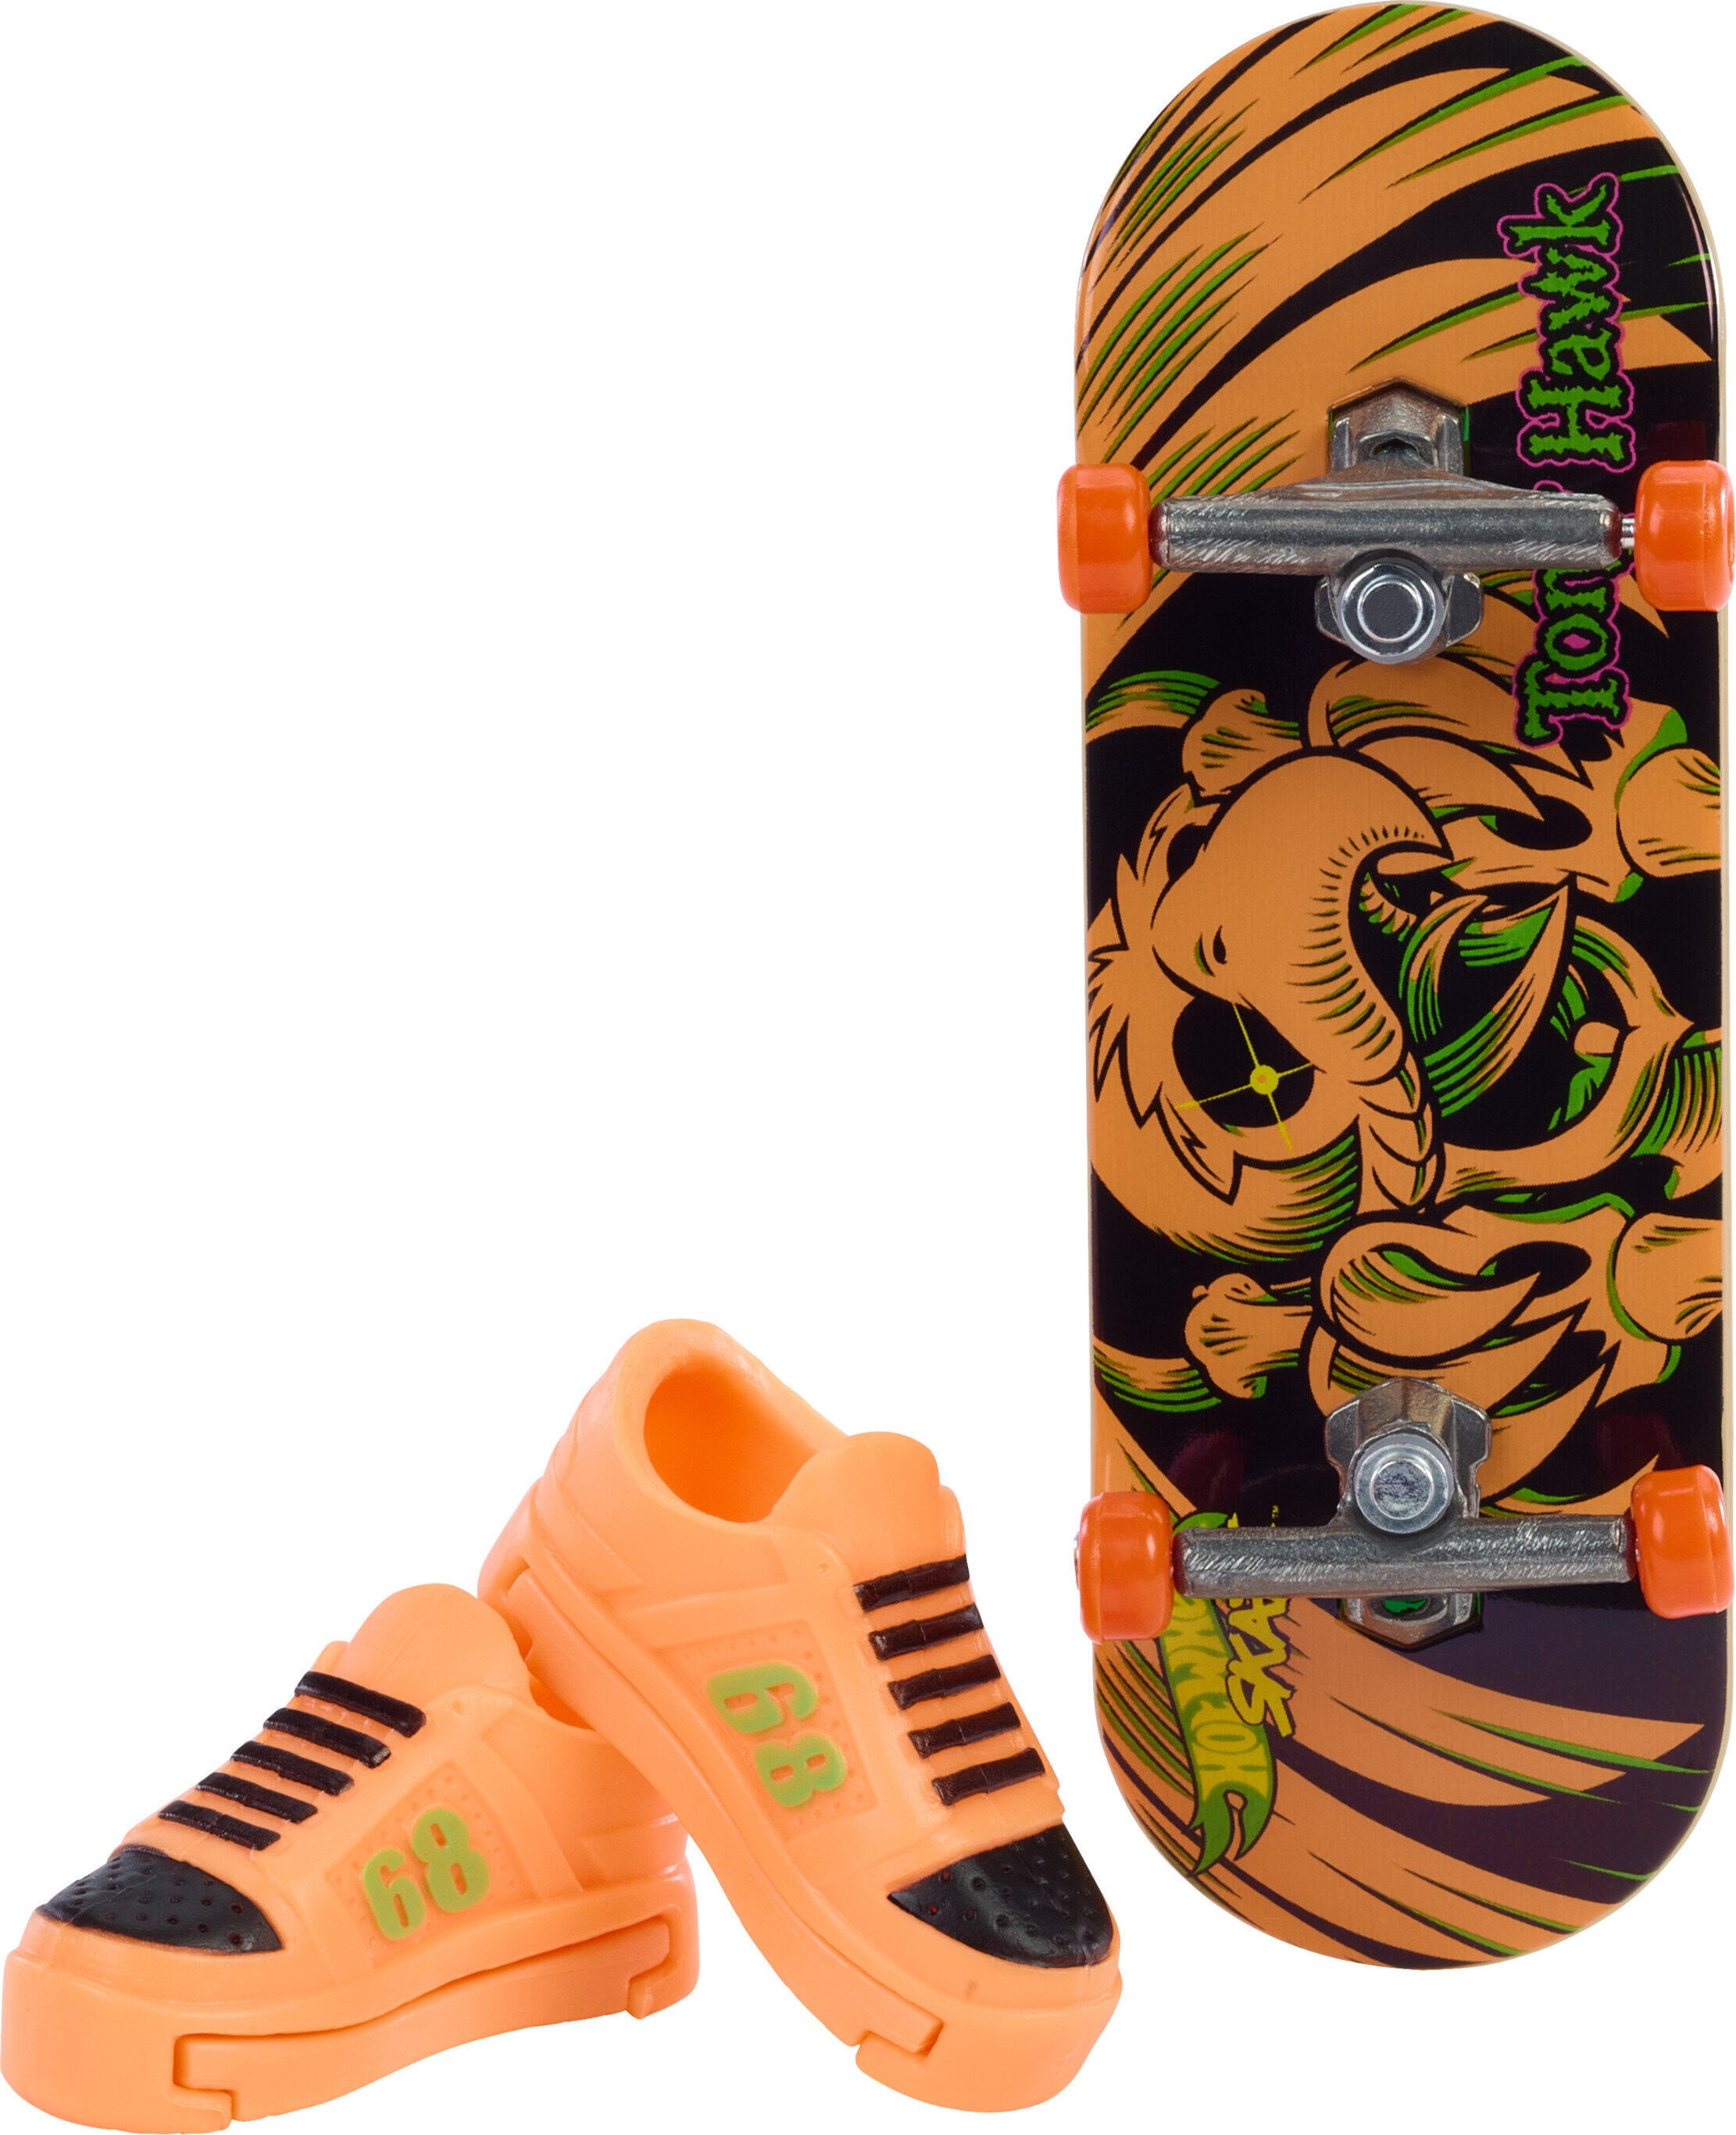 Neon Fury Hot Wheels Skate Fingerboard and Shoes – Square Imports